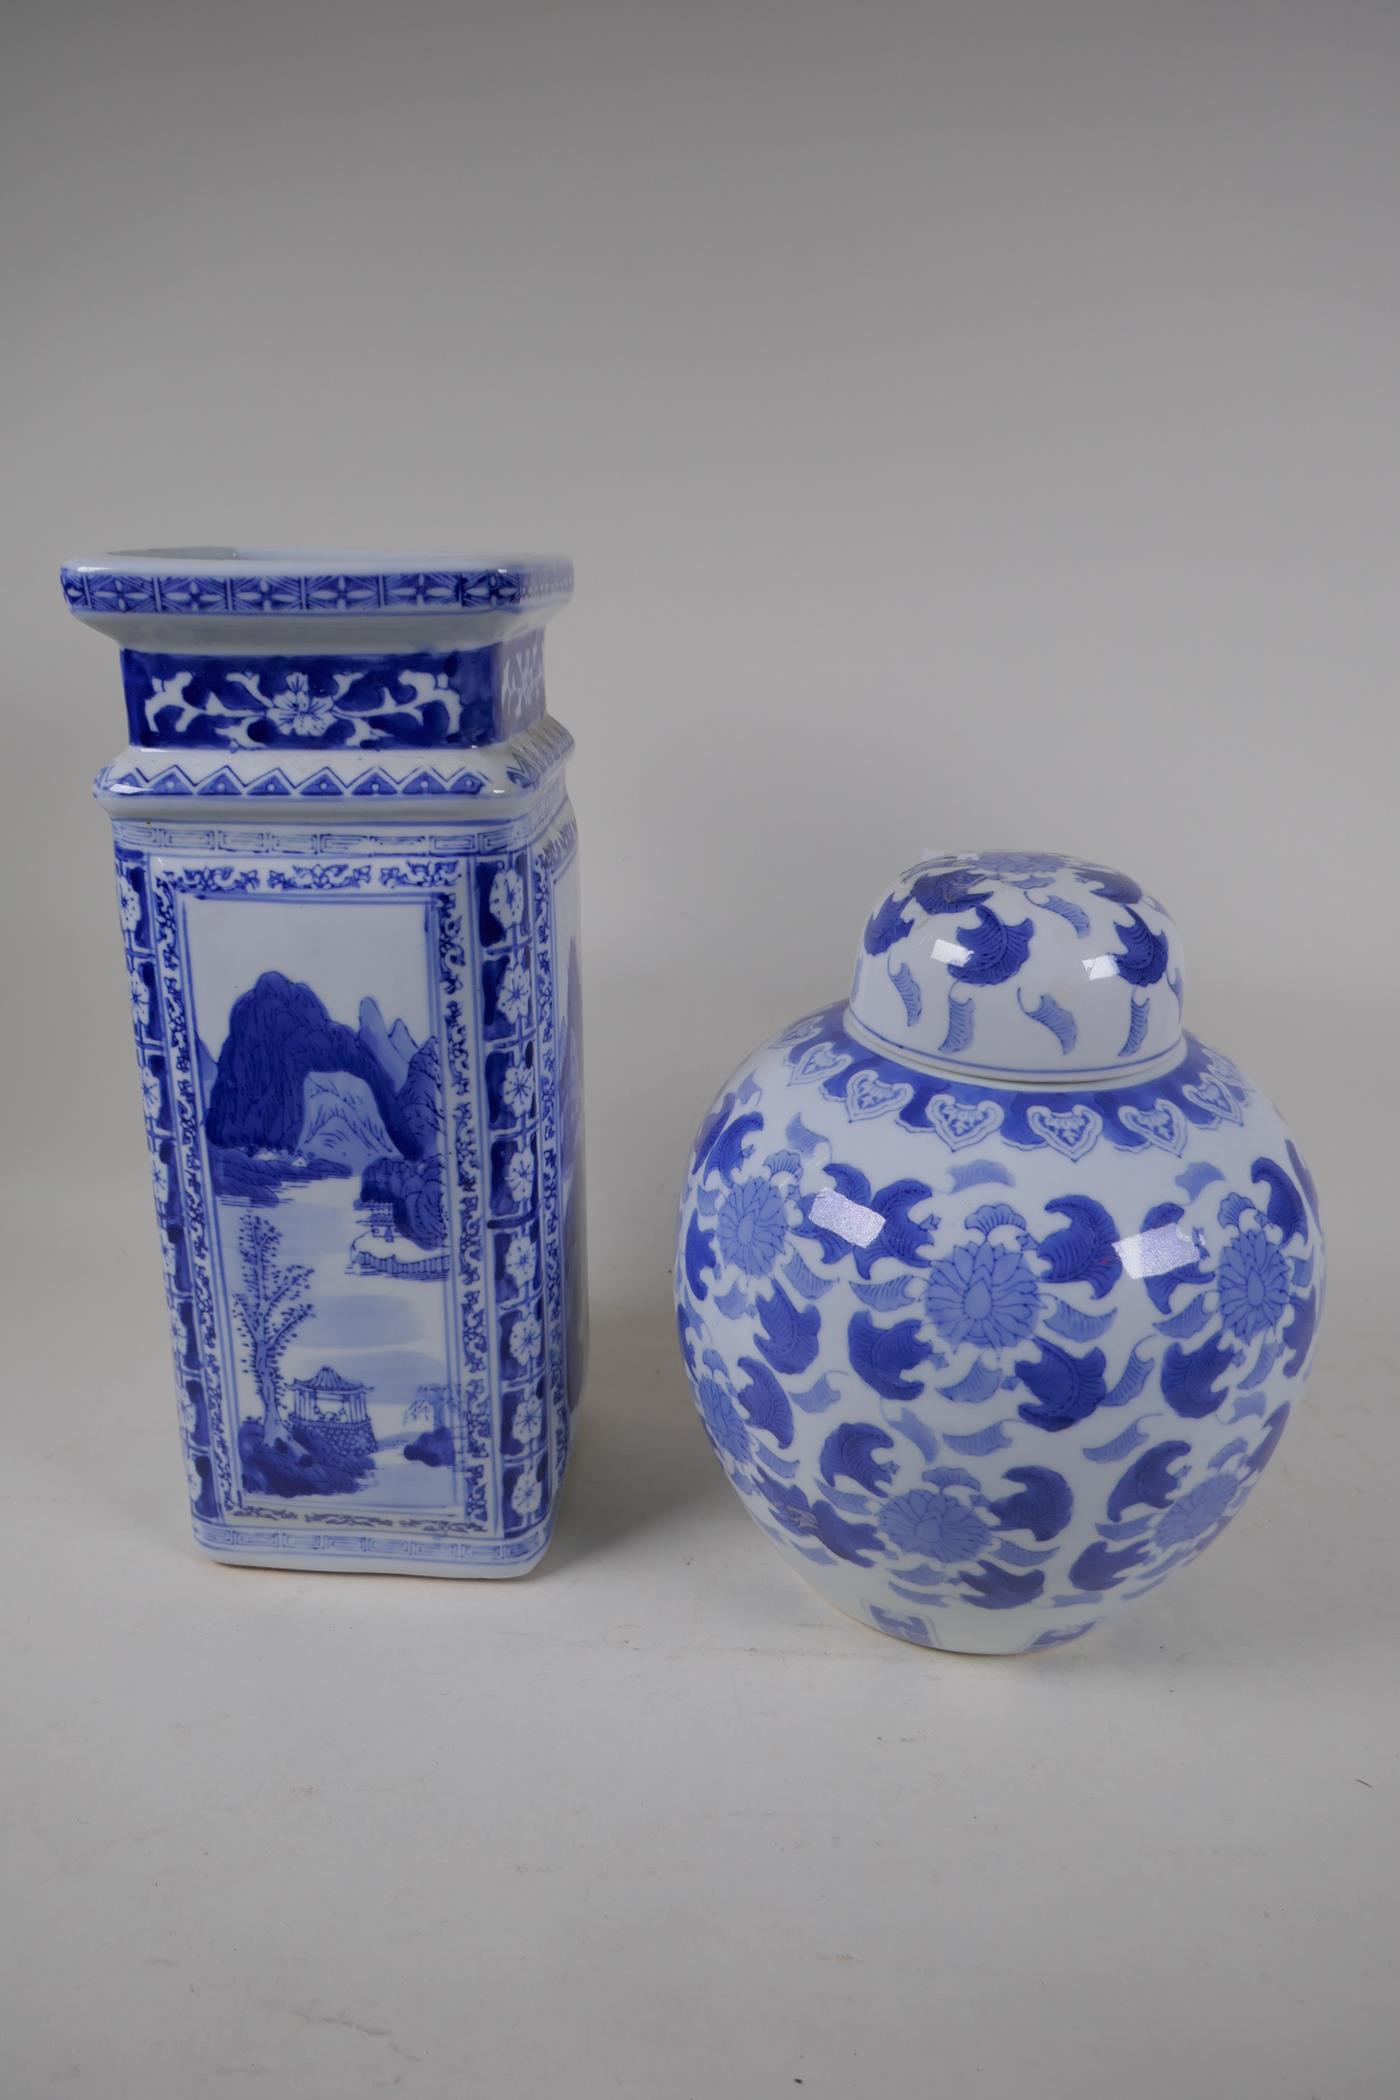 A Chinese blue and white porcelain bulbous ginger jar and a square section vase, 13½" high